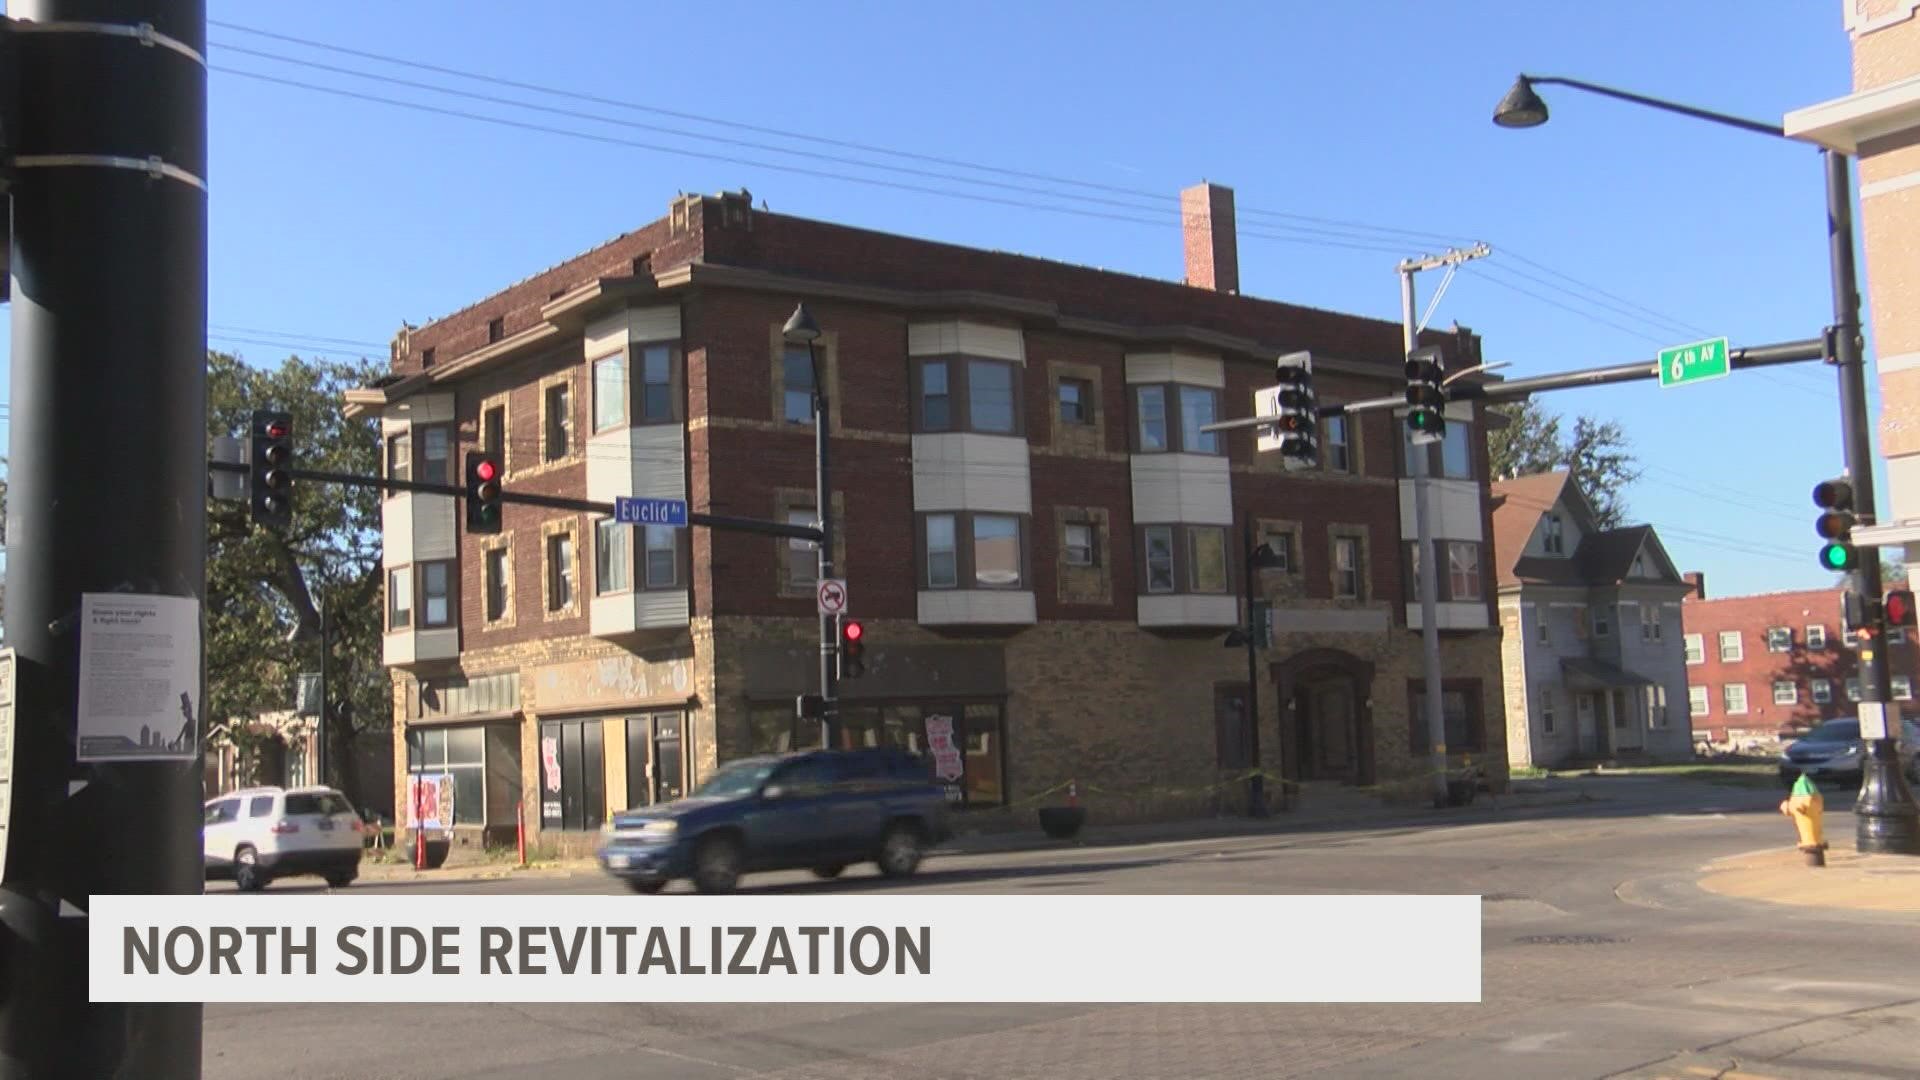 The north side of Des Moines is undergoing some changes, and according to two residents in the area, it's for the better. This includes restoring some buildings.